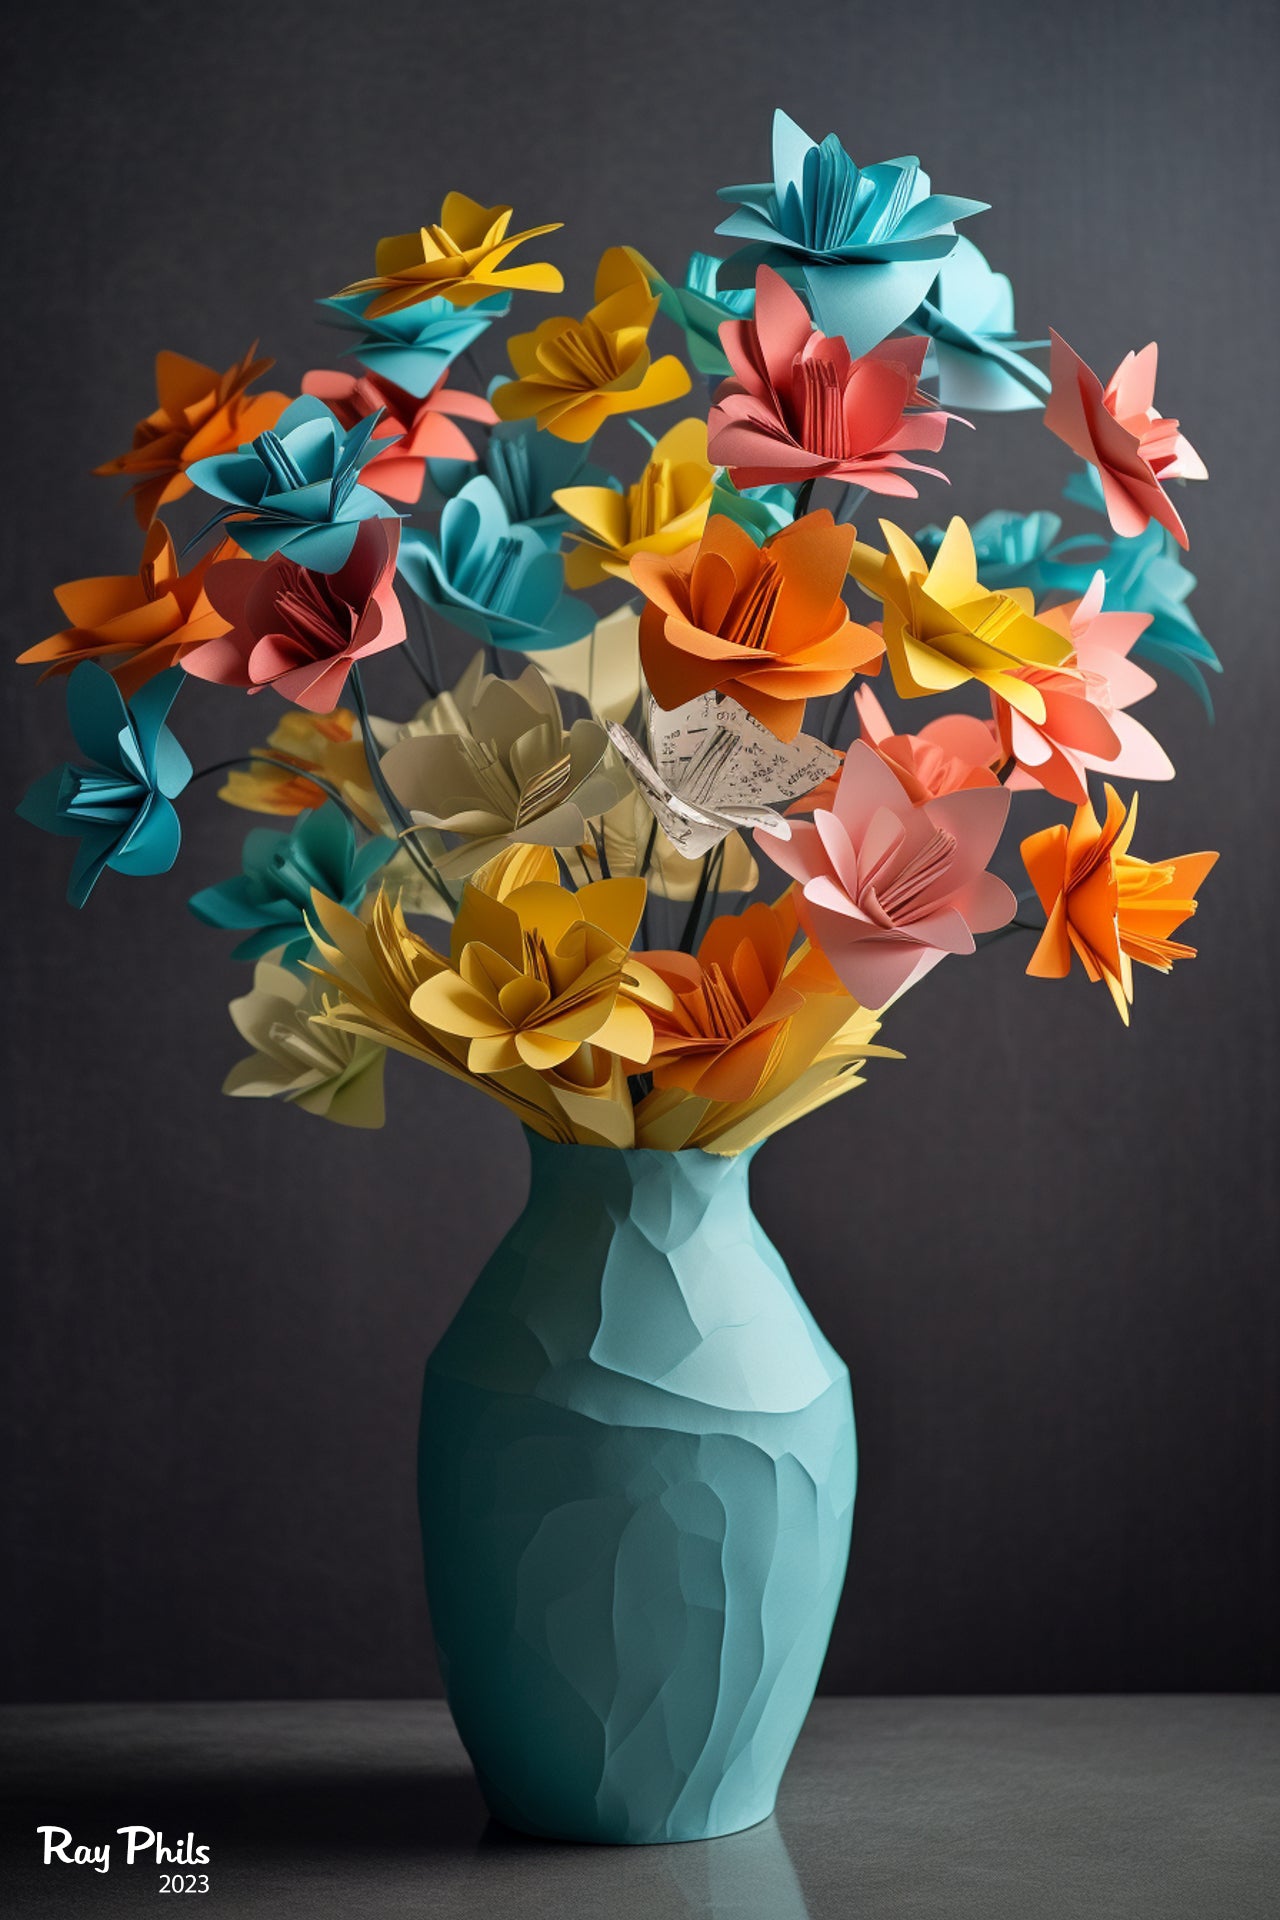 Colorful Flowers in a vase VI